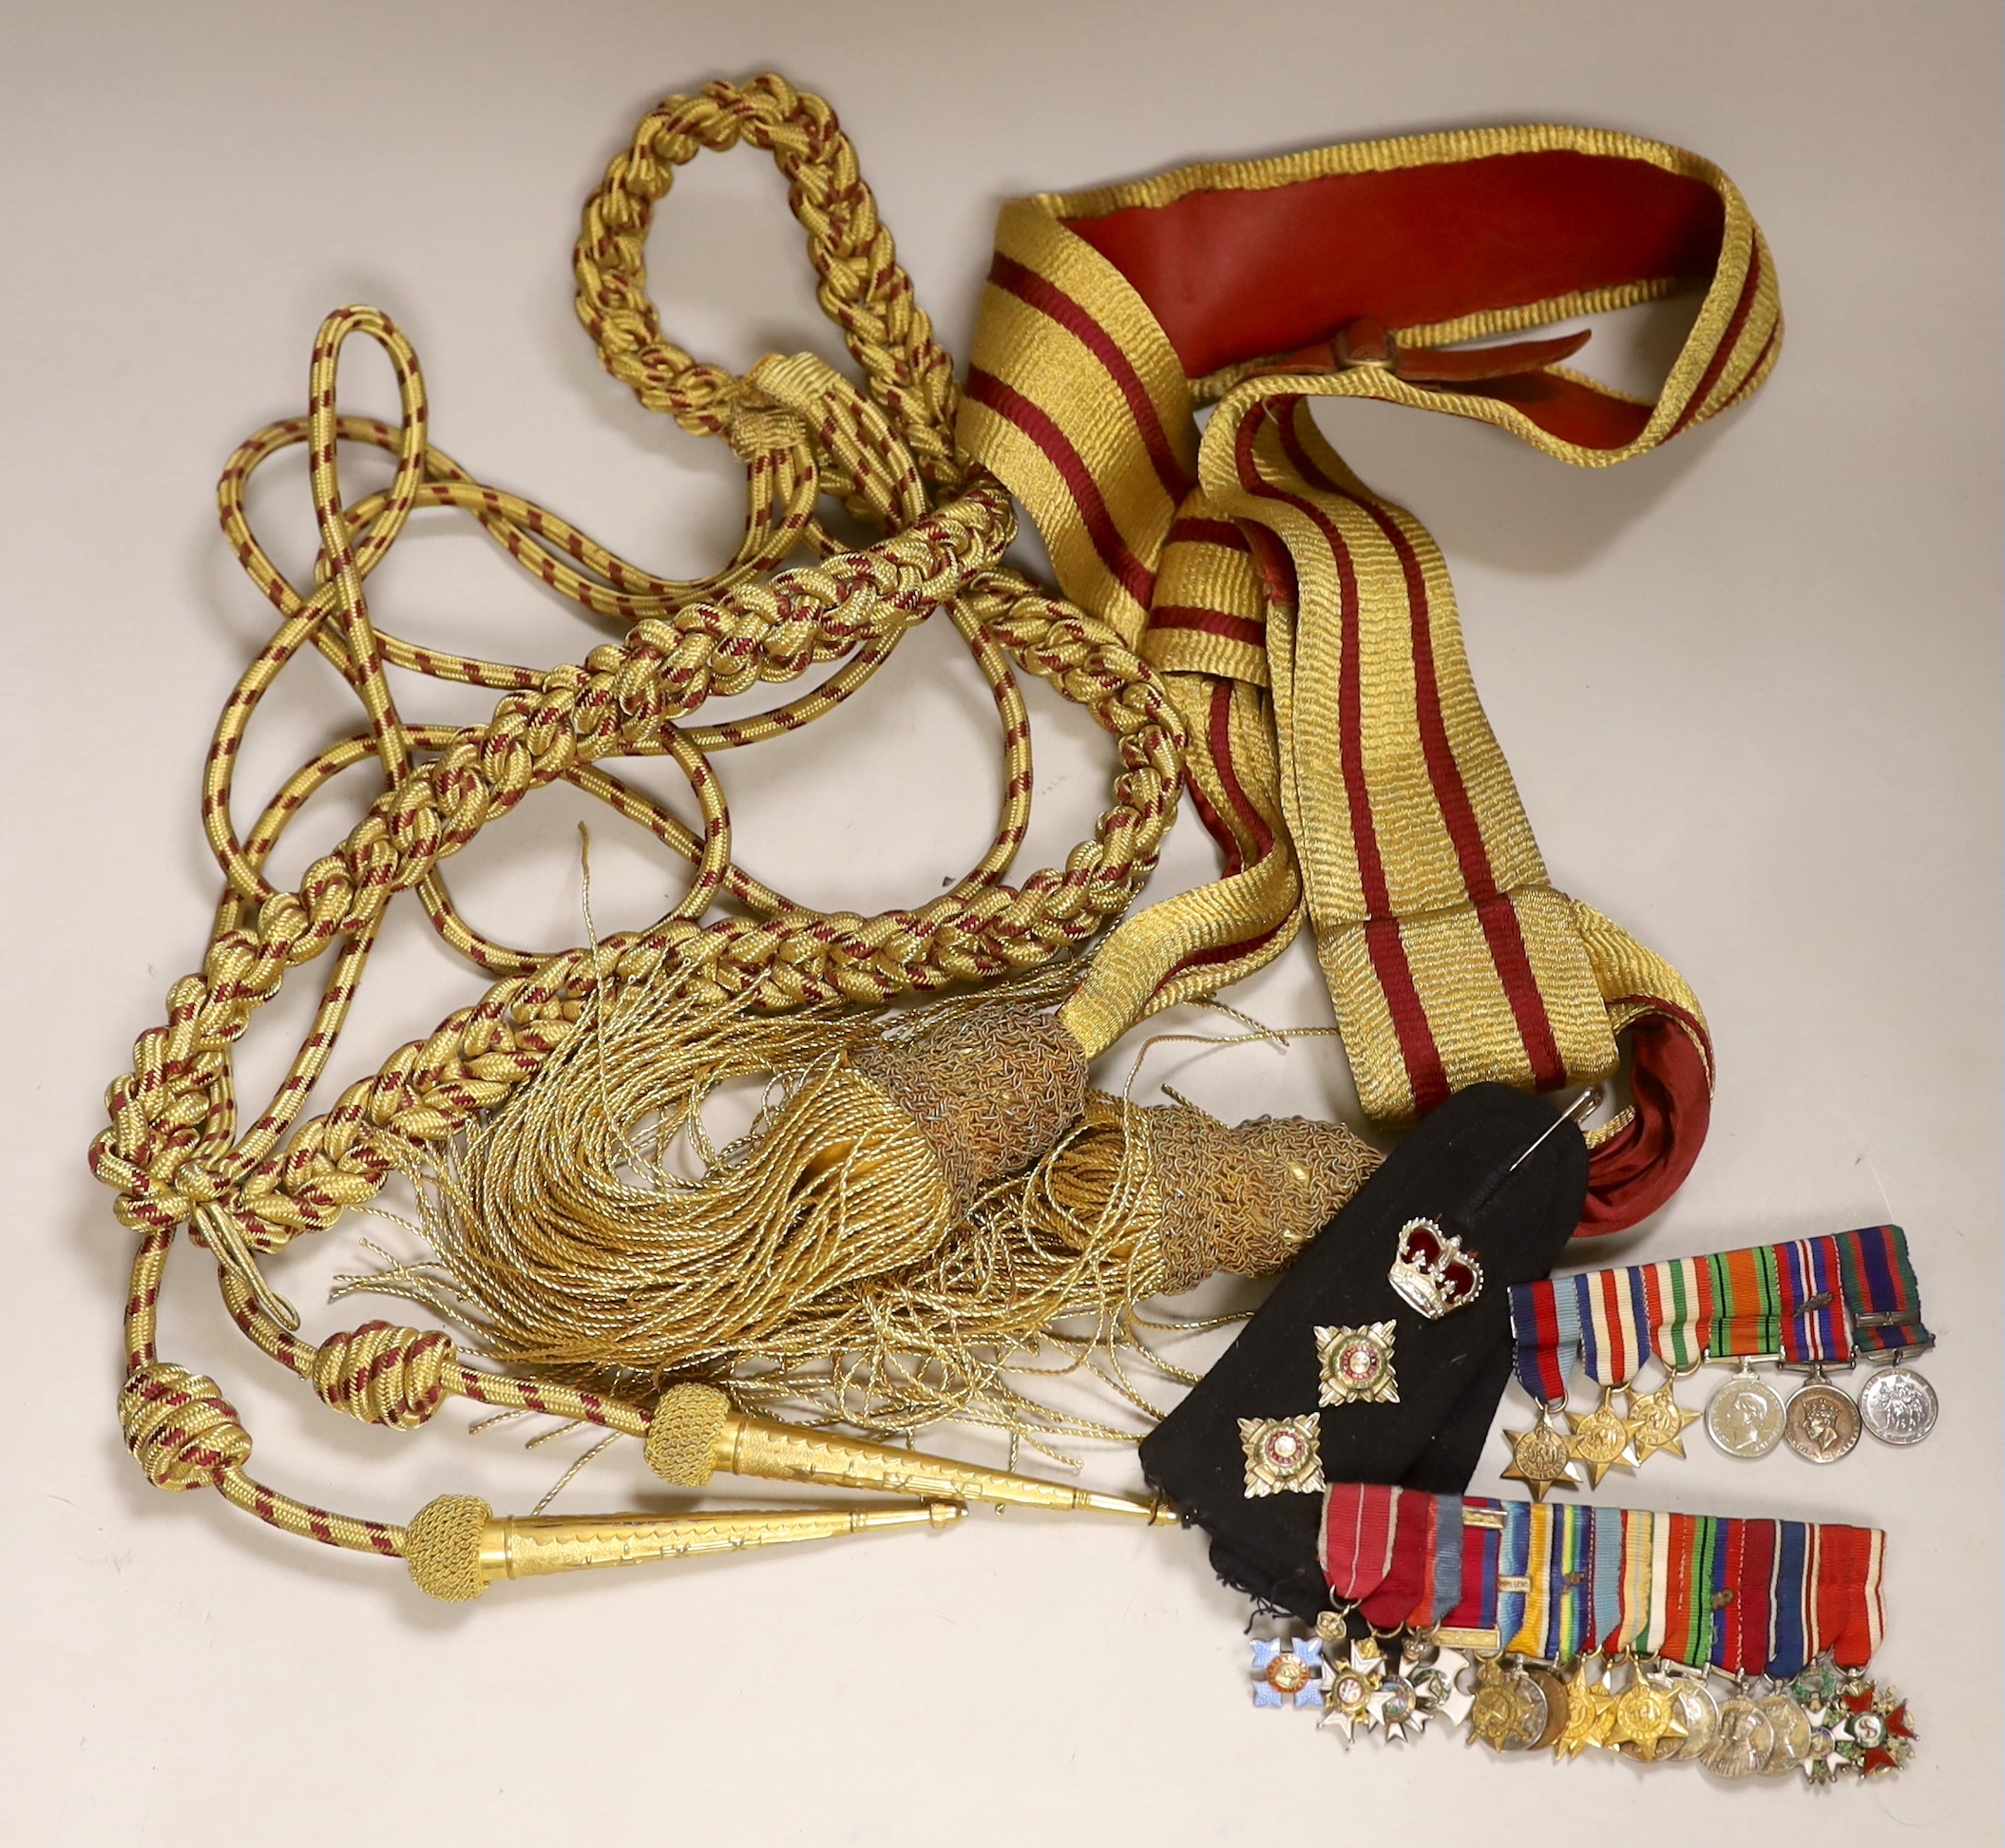 Two miniature medal groups awarded to Lt. Gen. Sir Desmond Anderson, together with his epaulets, frogging and two items of related paperwork